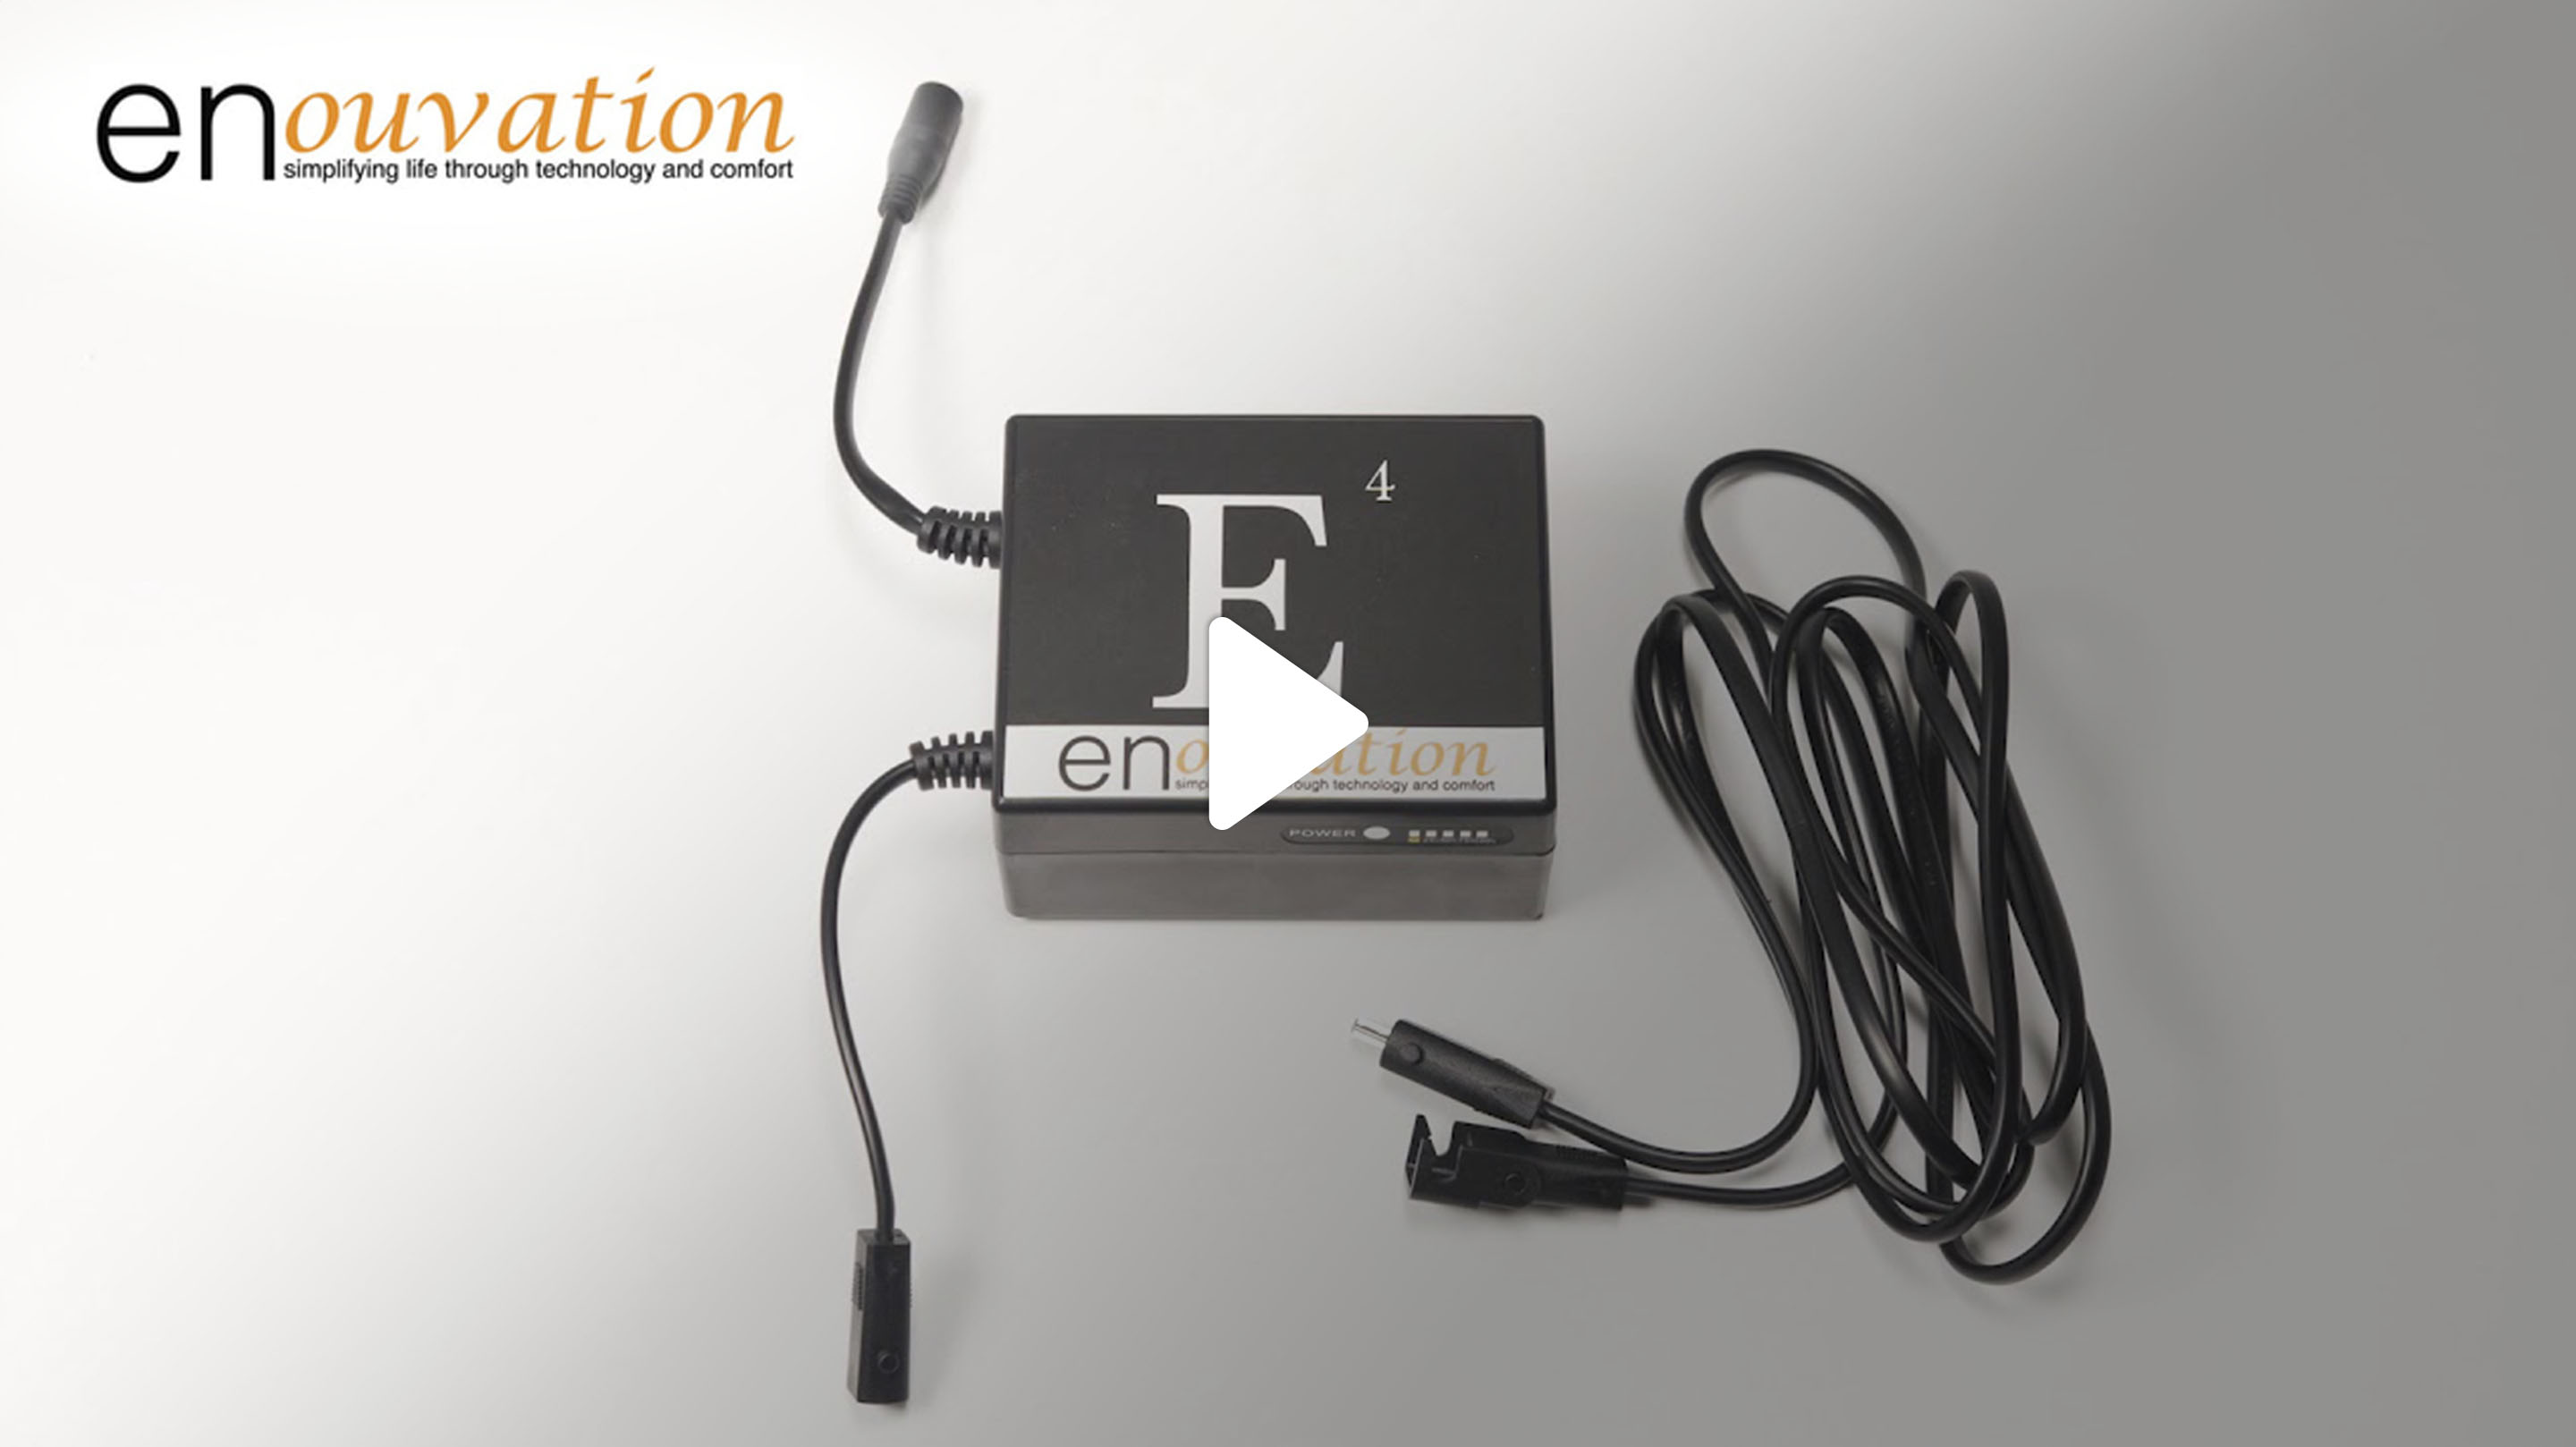 Enouvation Power Pack Installation Guide